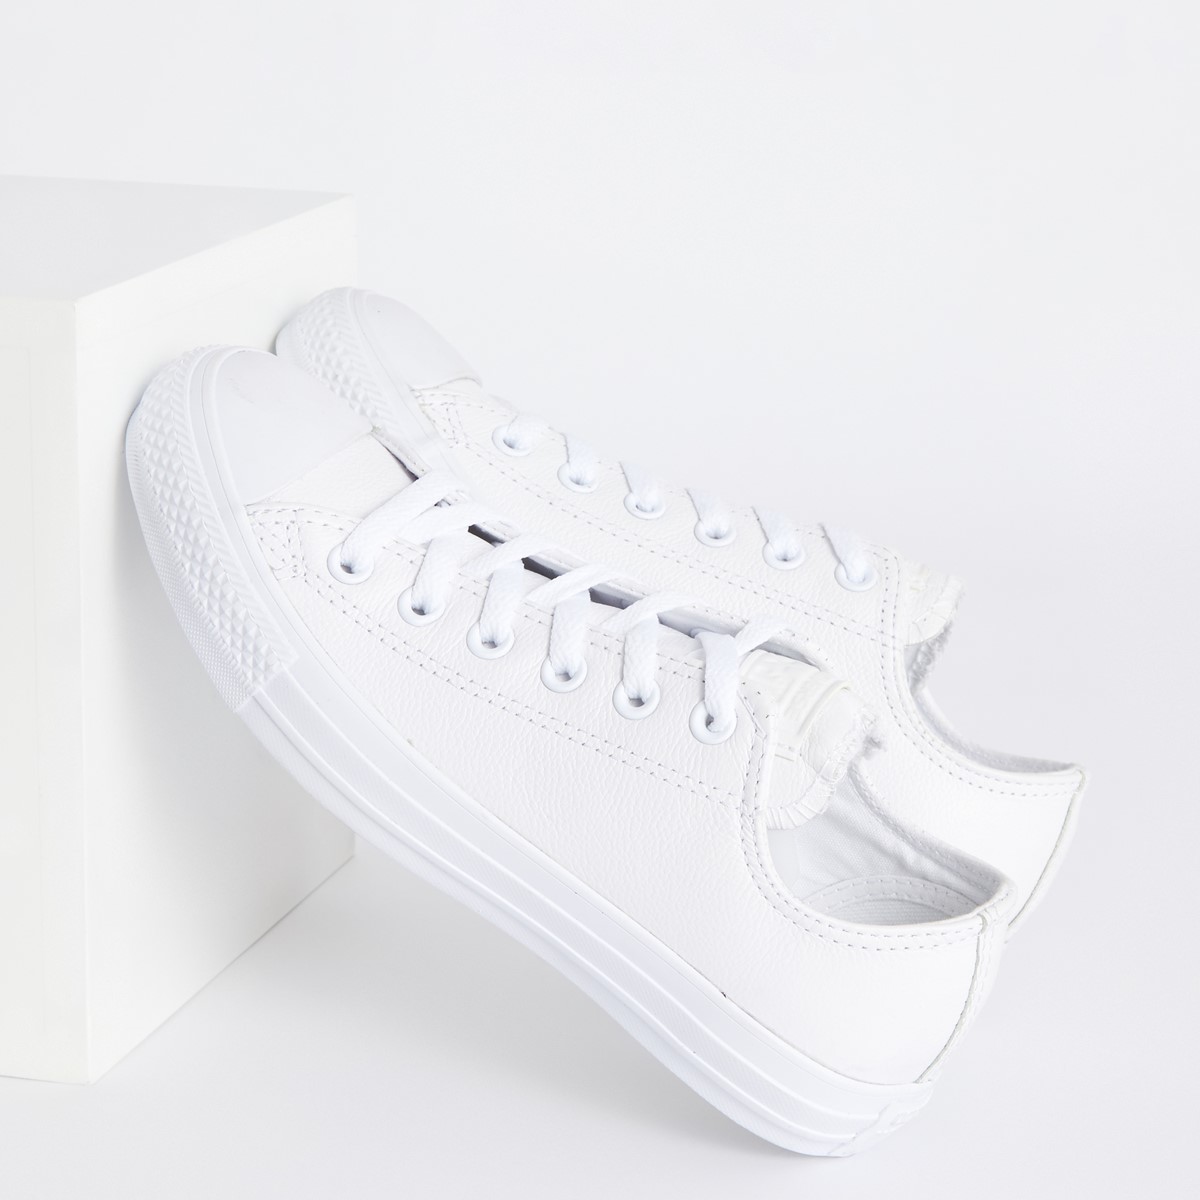 converse white leather size 5.5